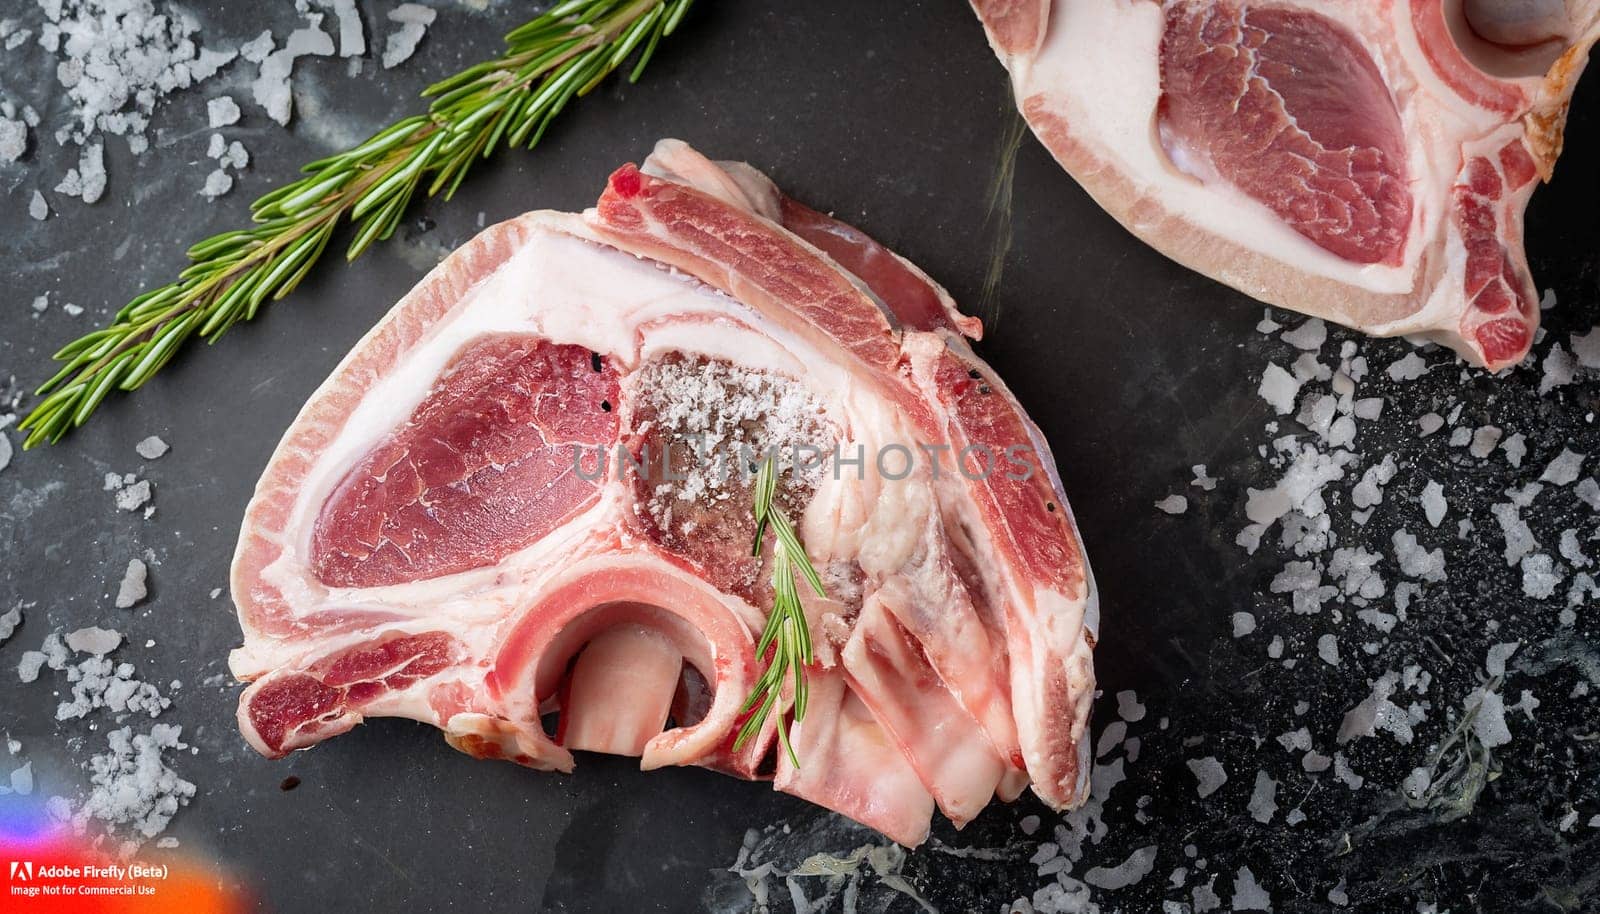 macro photo of sliced lamb carcass on black marble with sea salt crumbs and rosemary sprig by dec925